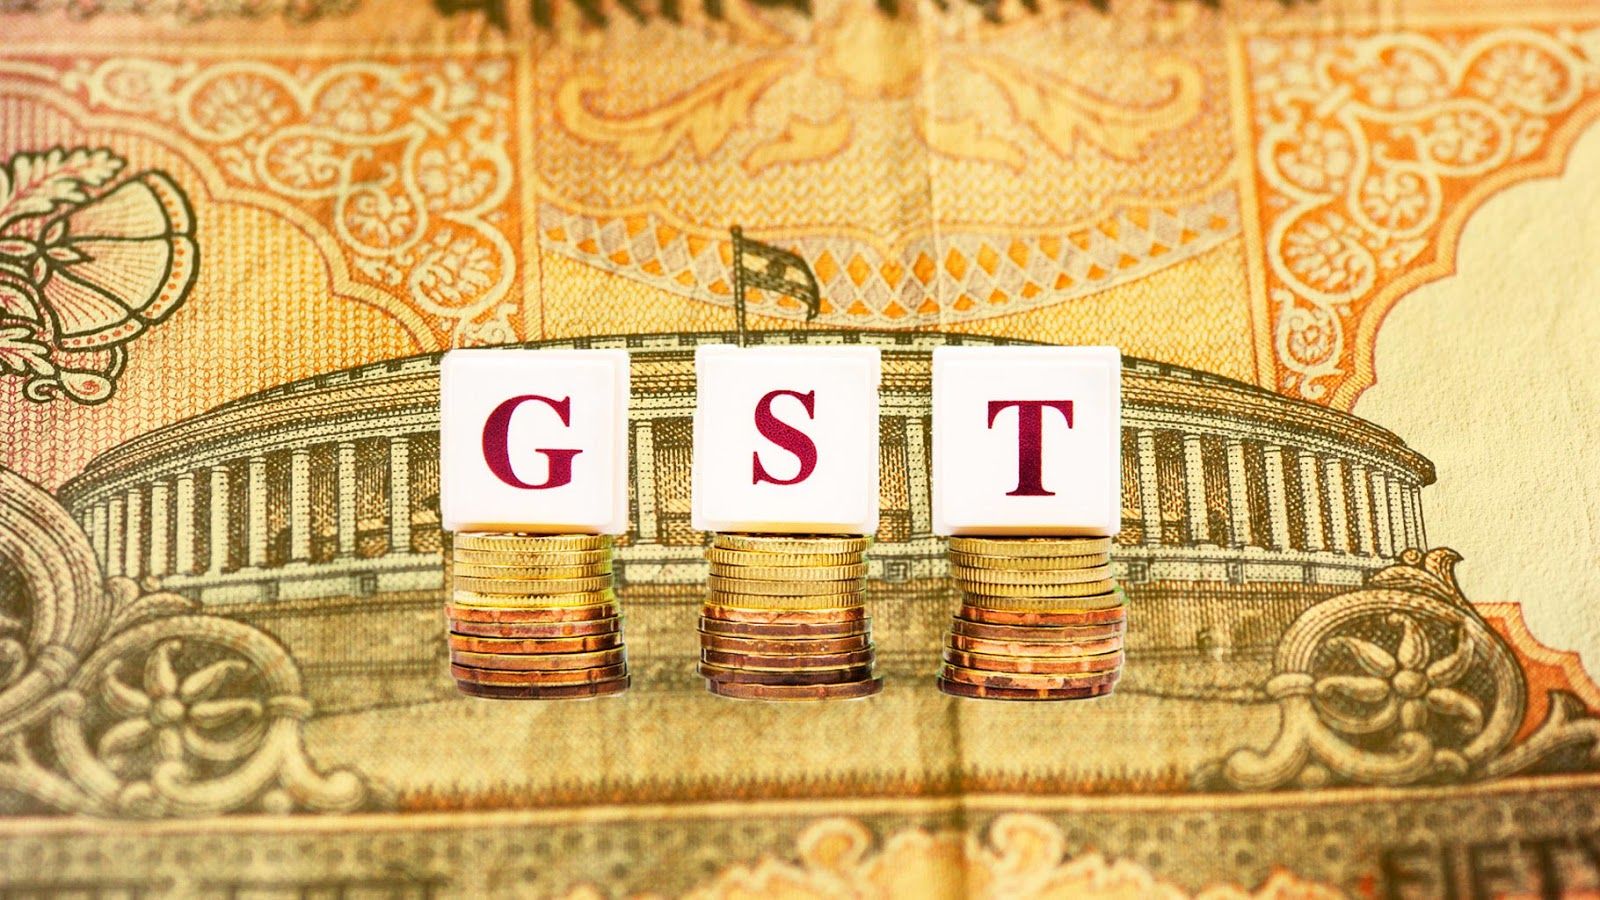 With businesses needing to file 3B under GST, Tally launches solution